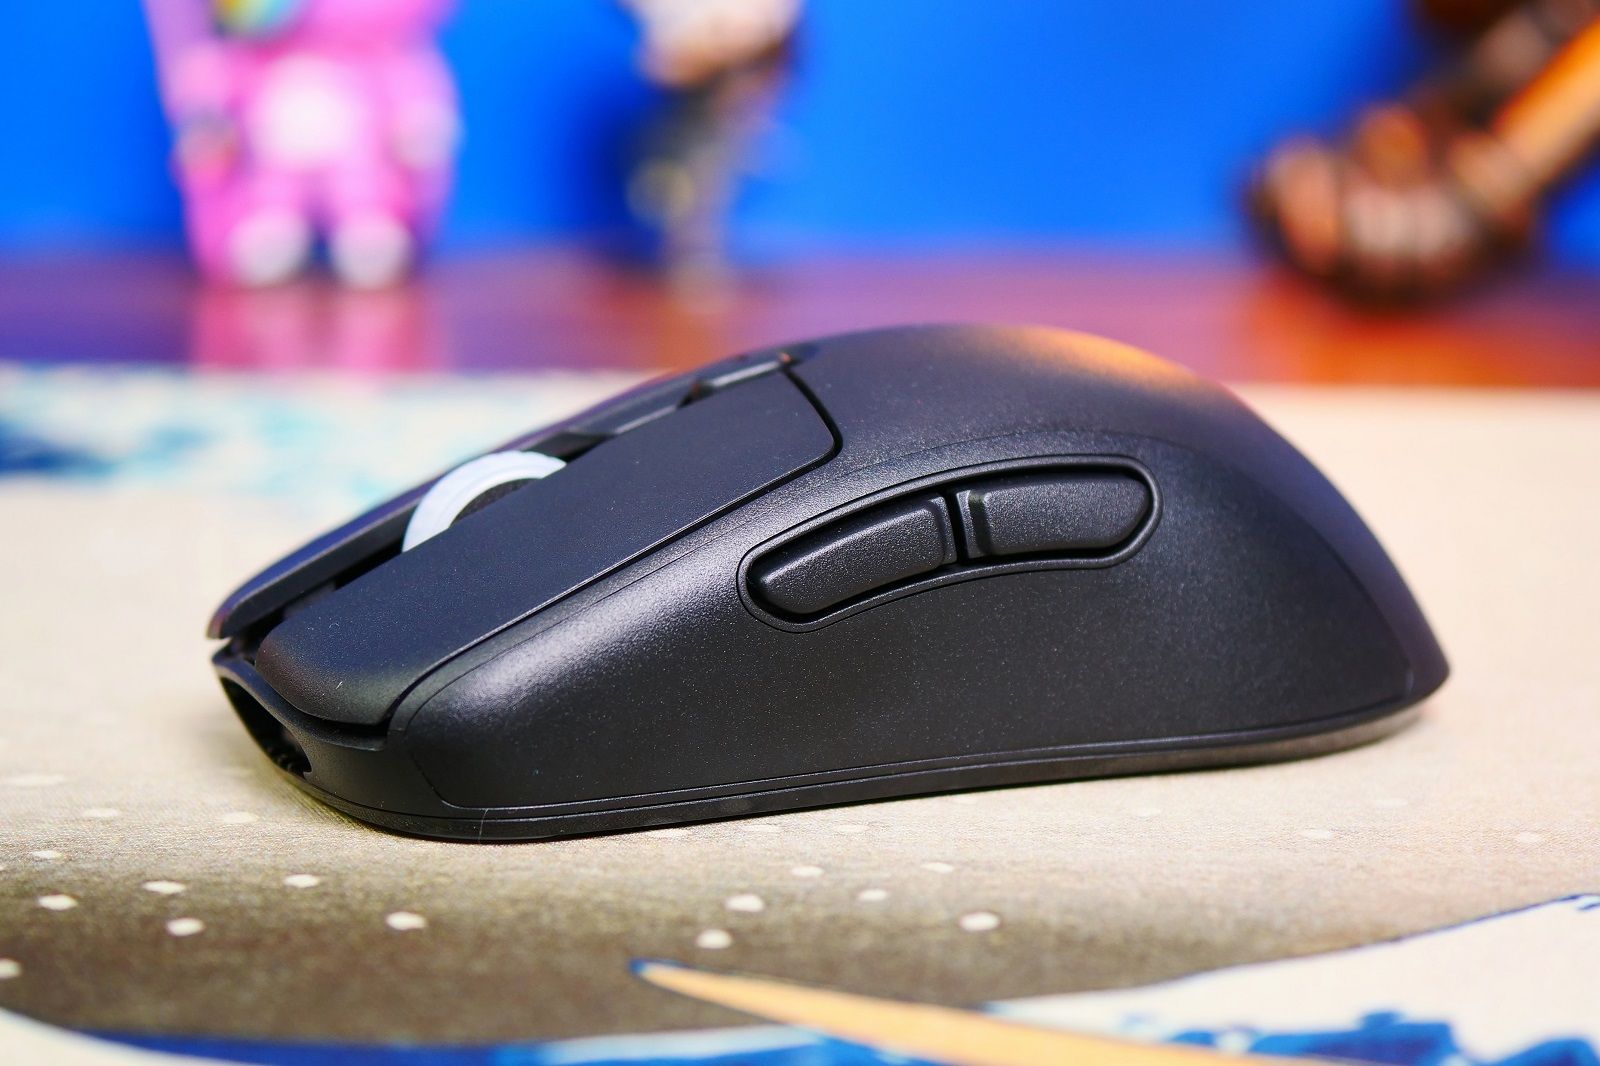 Fnatic Bolt gaming mouse review photo 2